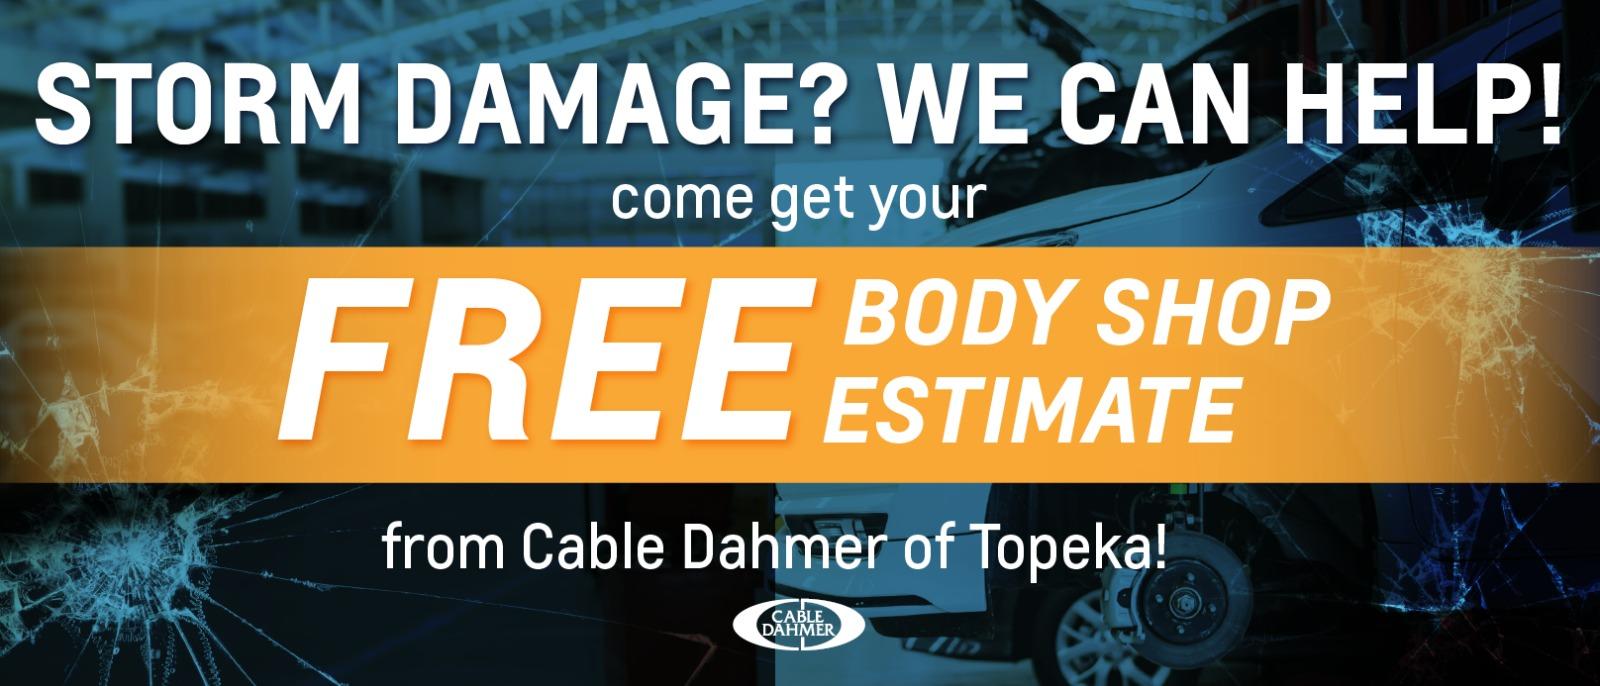 Get a free estimate from our body shop if you've experienced storm damage.